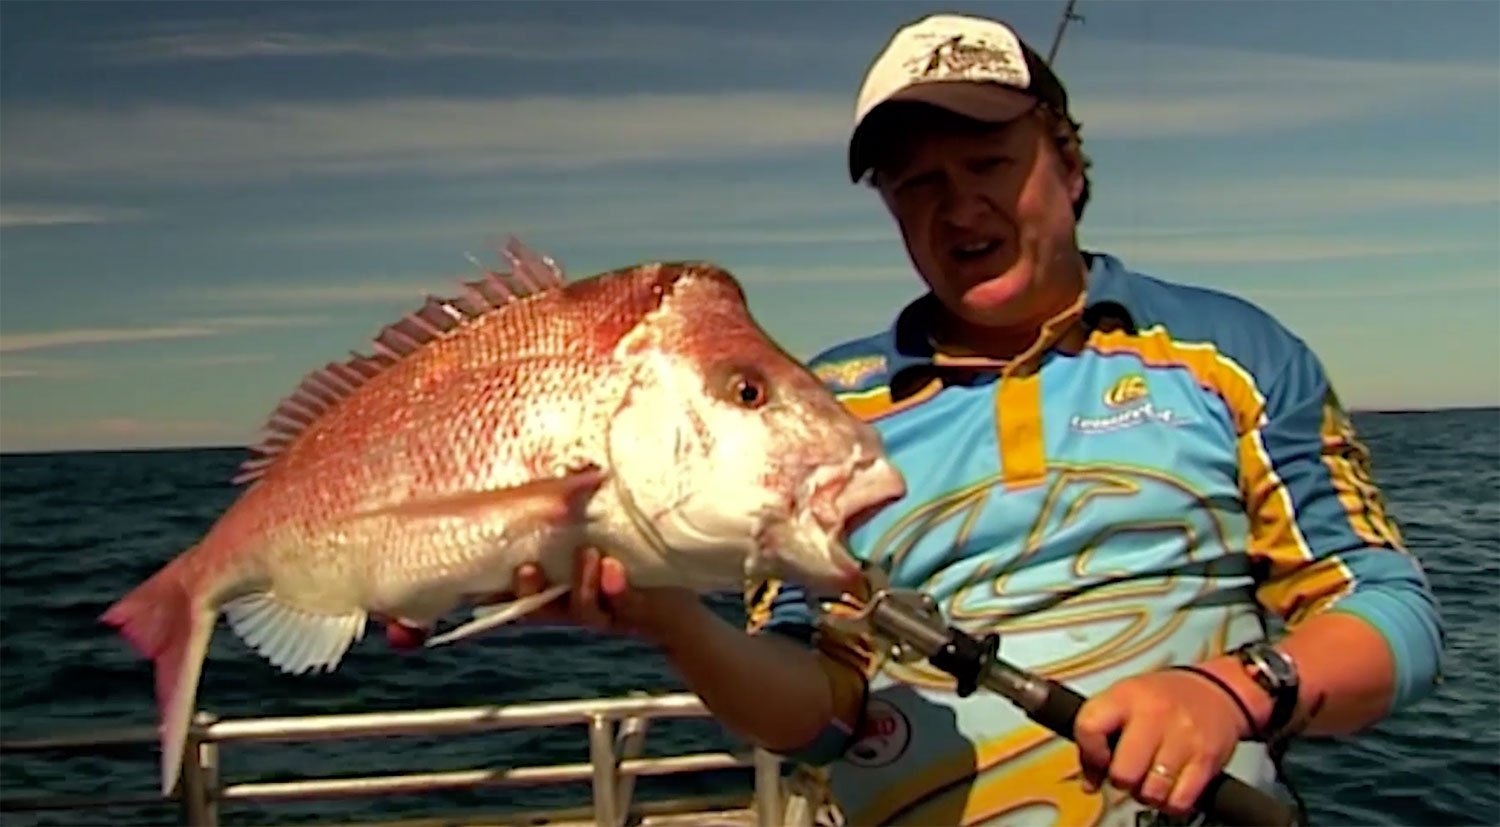 Steve Correia with Pink Snapper